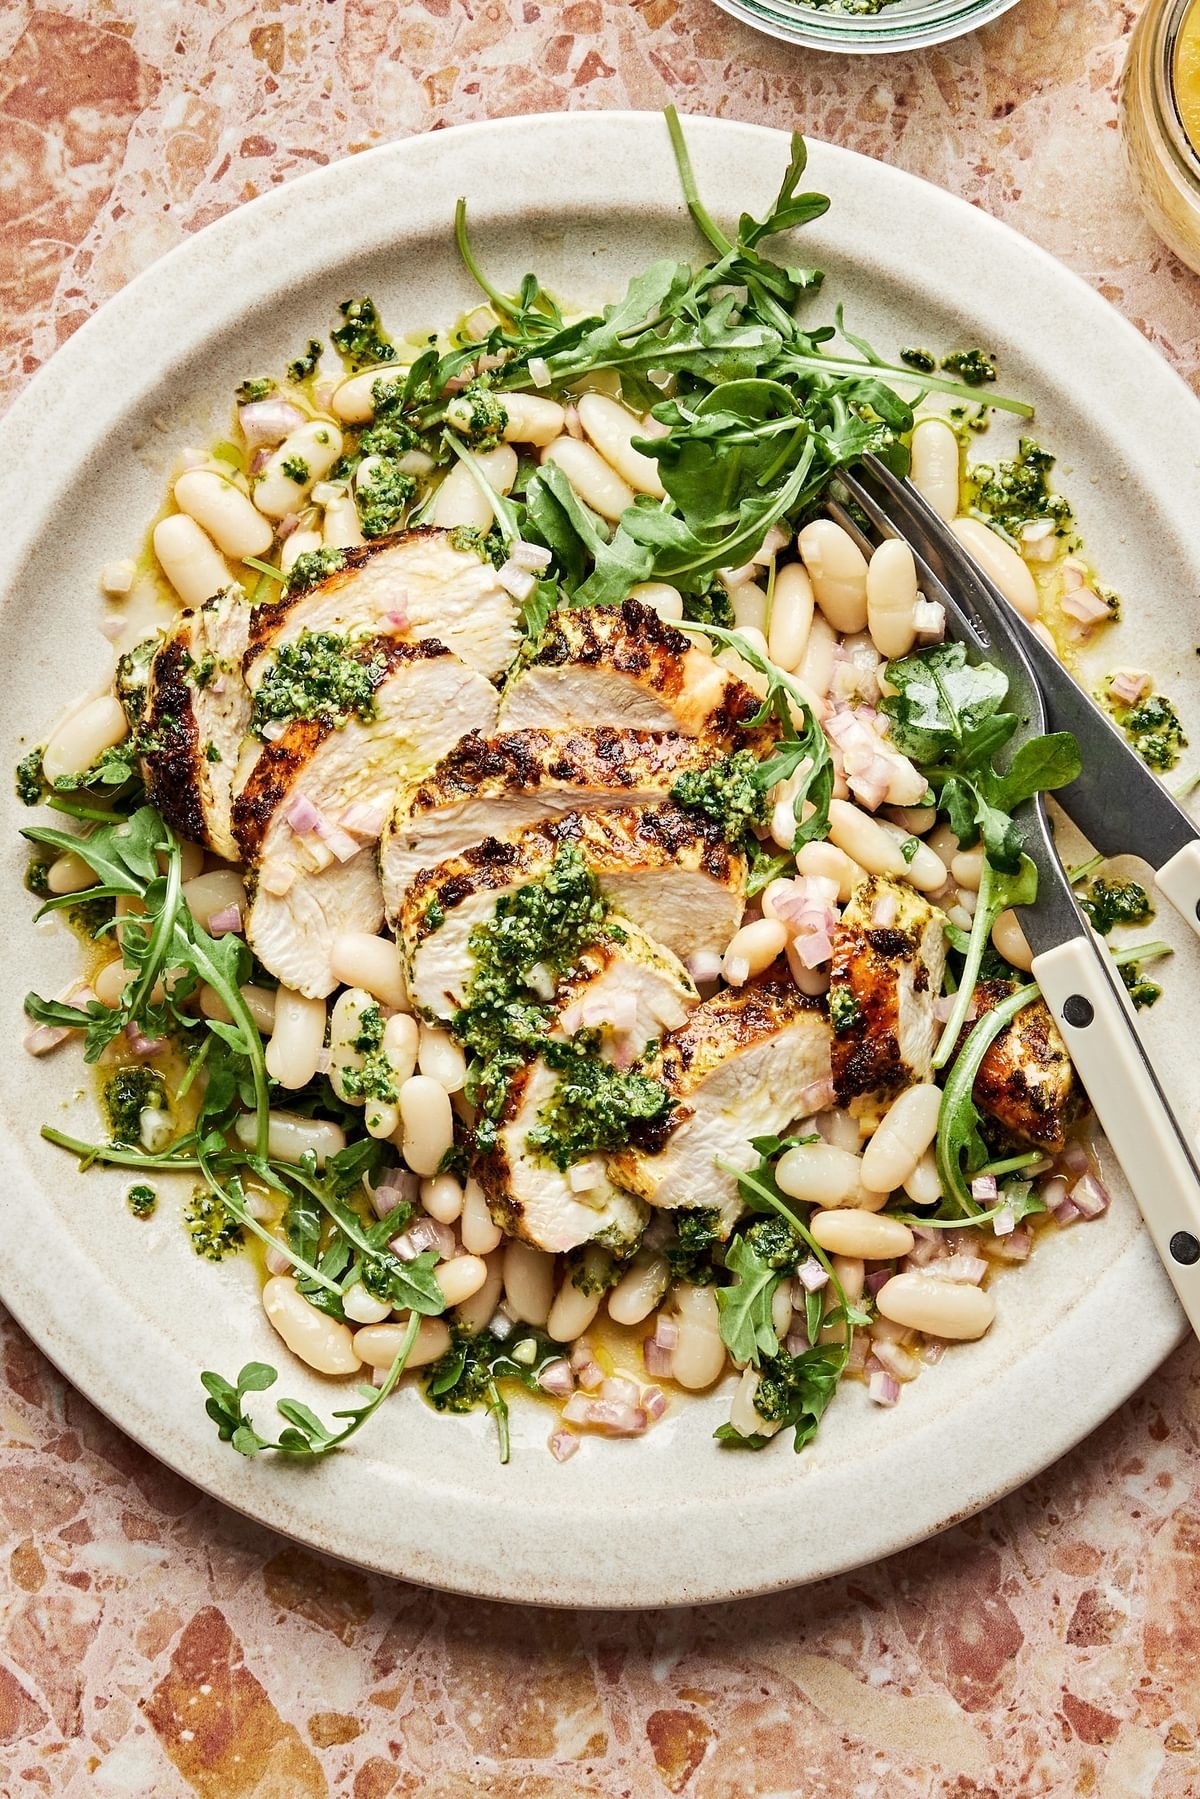 sliced chicken on top of a bed of arugula and white beans